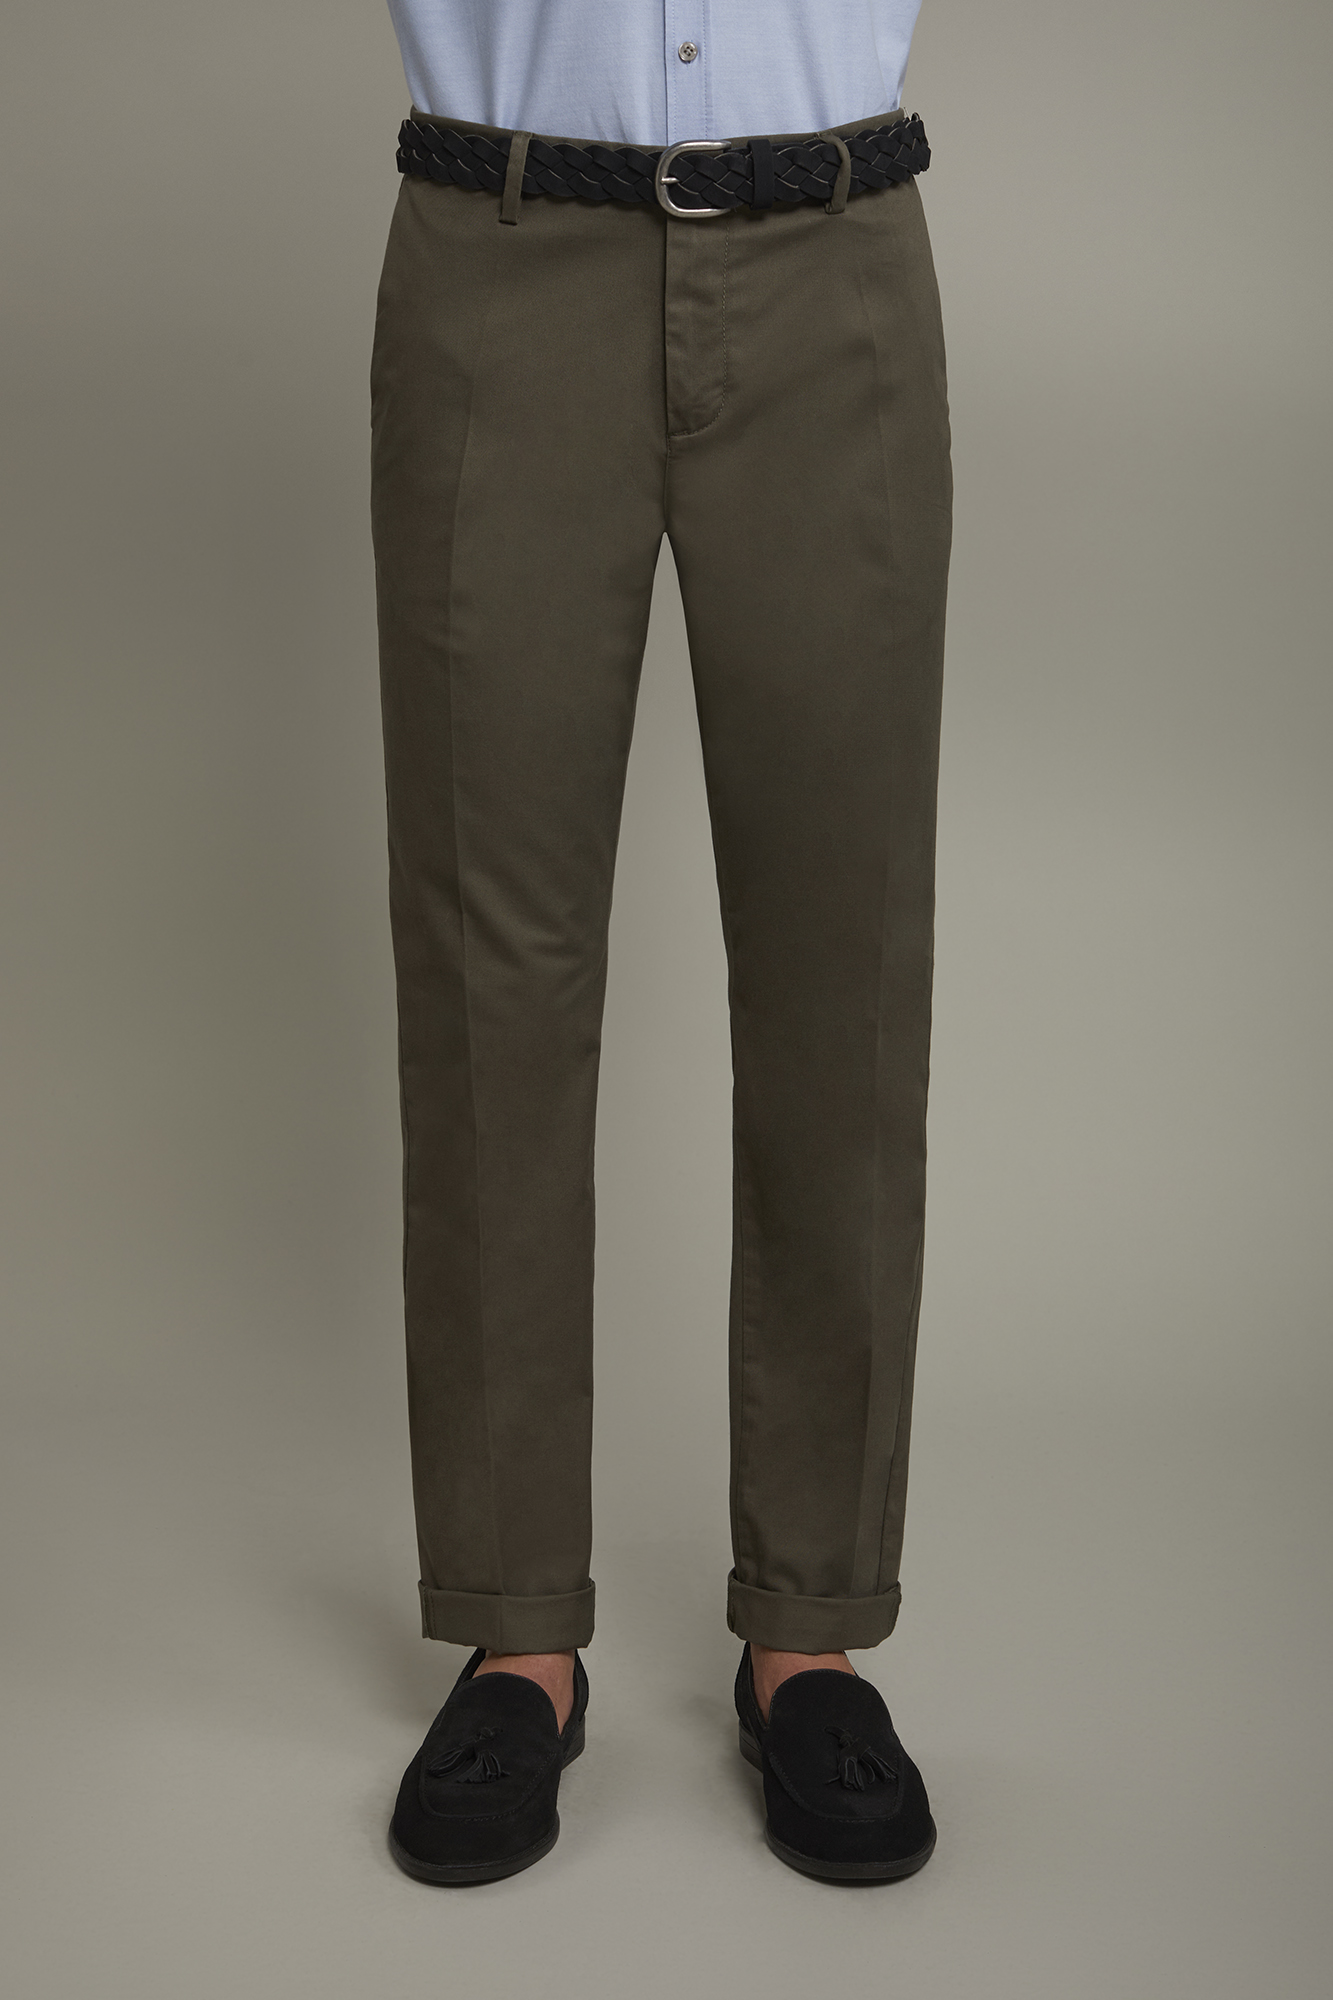 Men's chino trousers classic twill construction perfect fit image number null